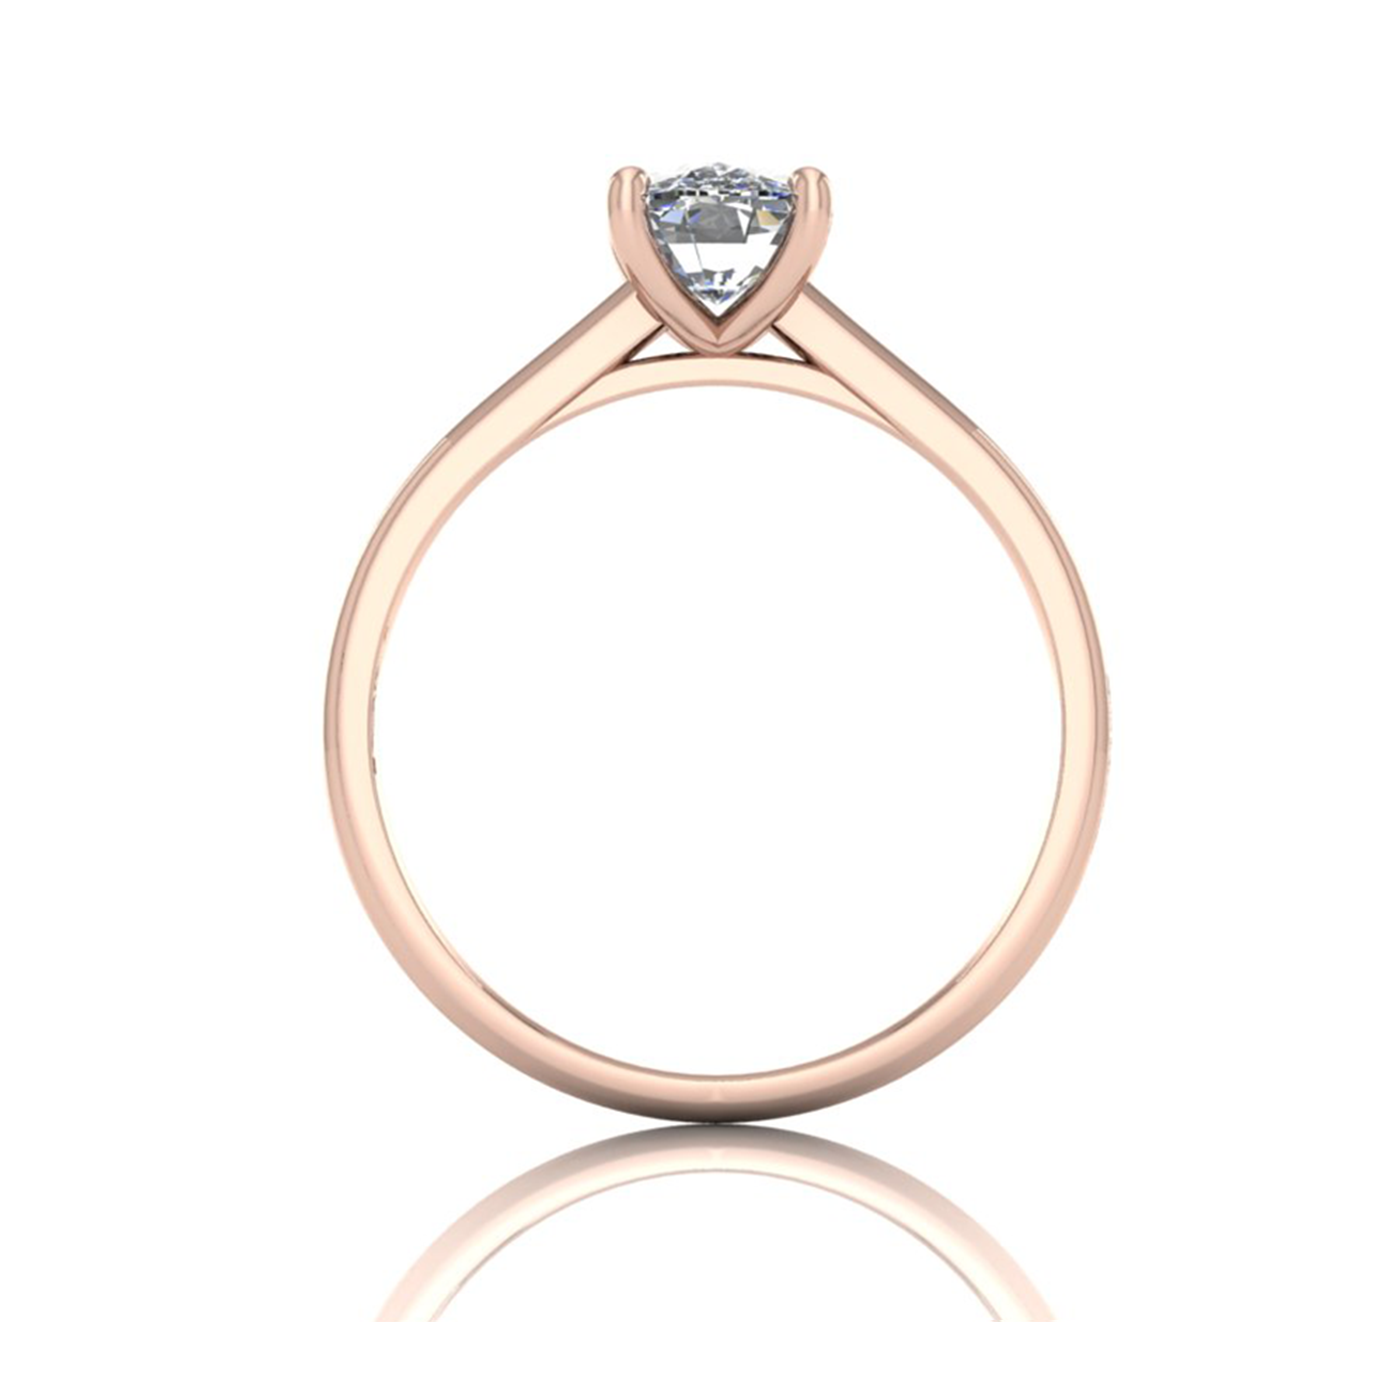 18k rose gold  1.50 ct 4 prongs solitaire elongated cushion cut diamond engagement ring with whisper thin band